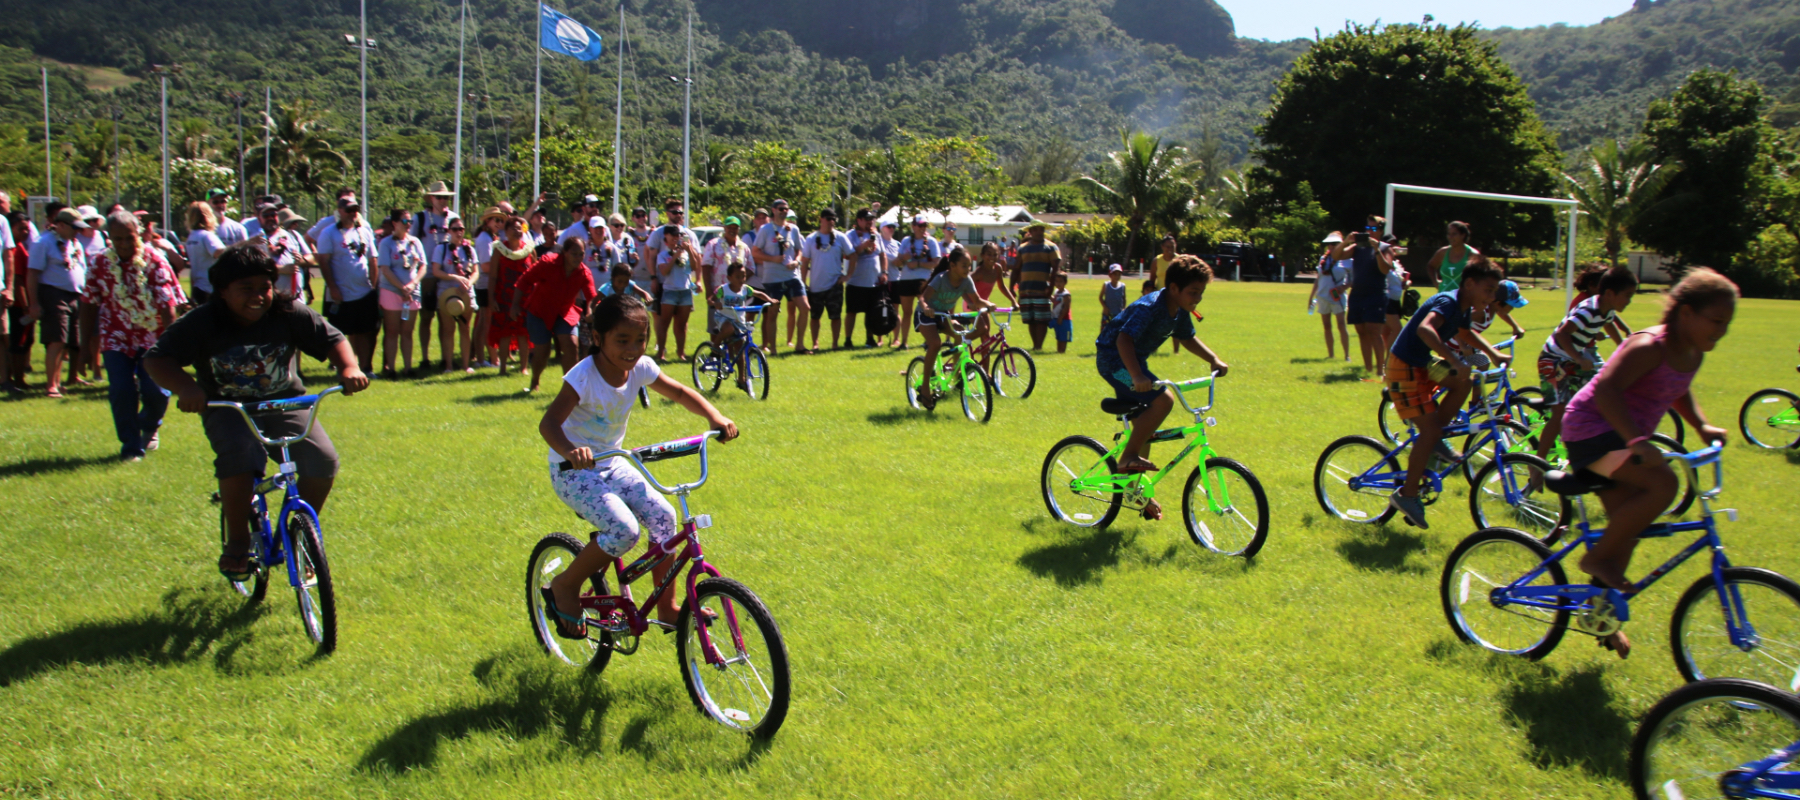 Image of a group of children riding bikes in a field